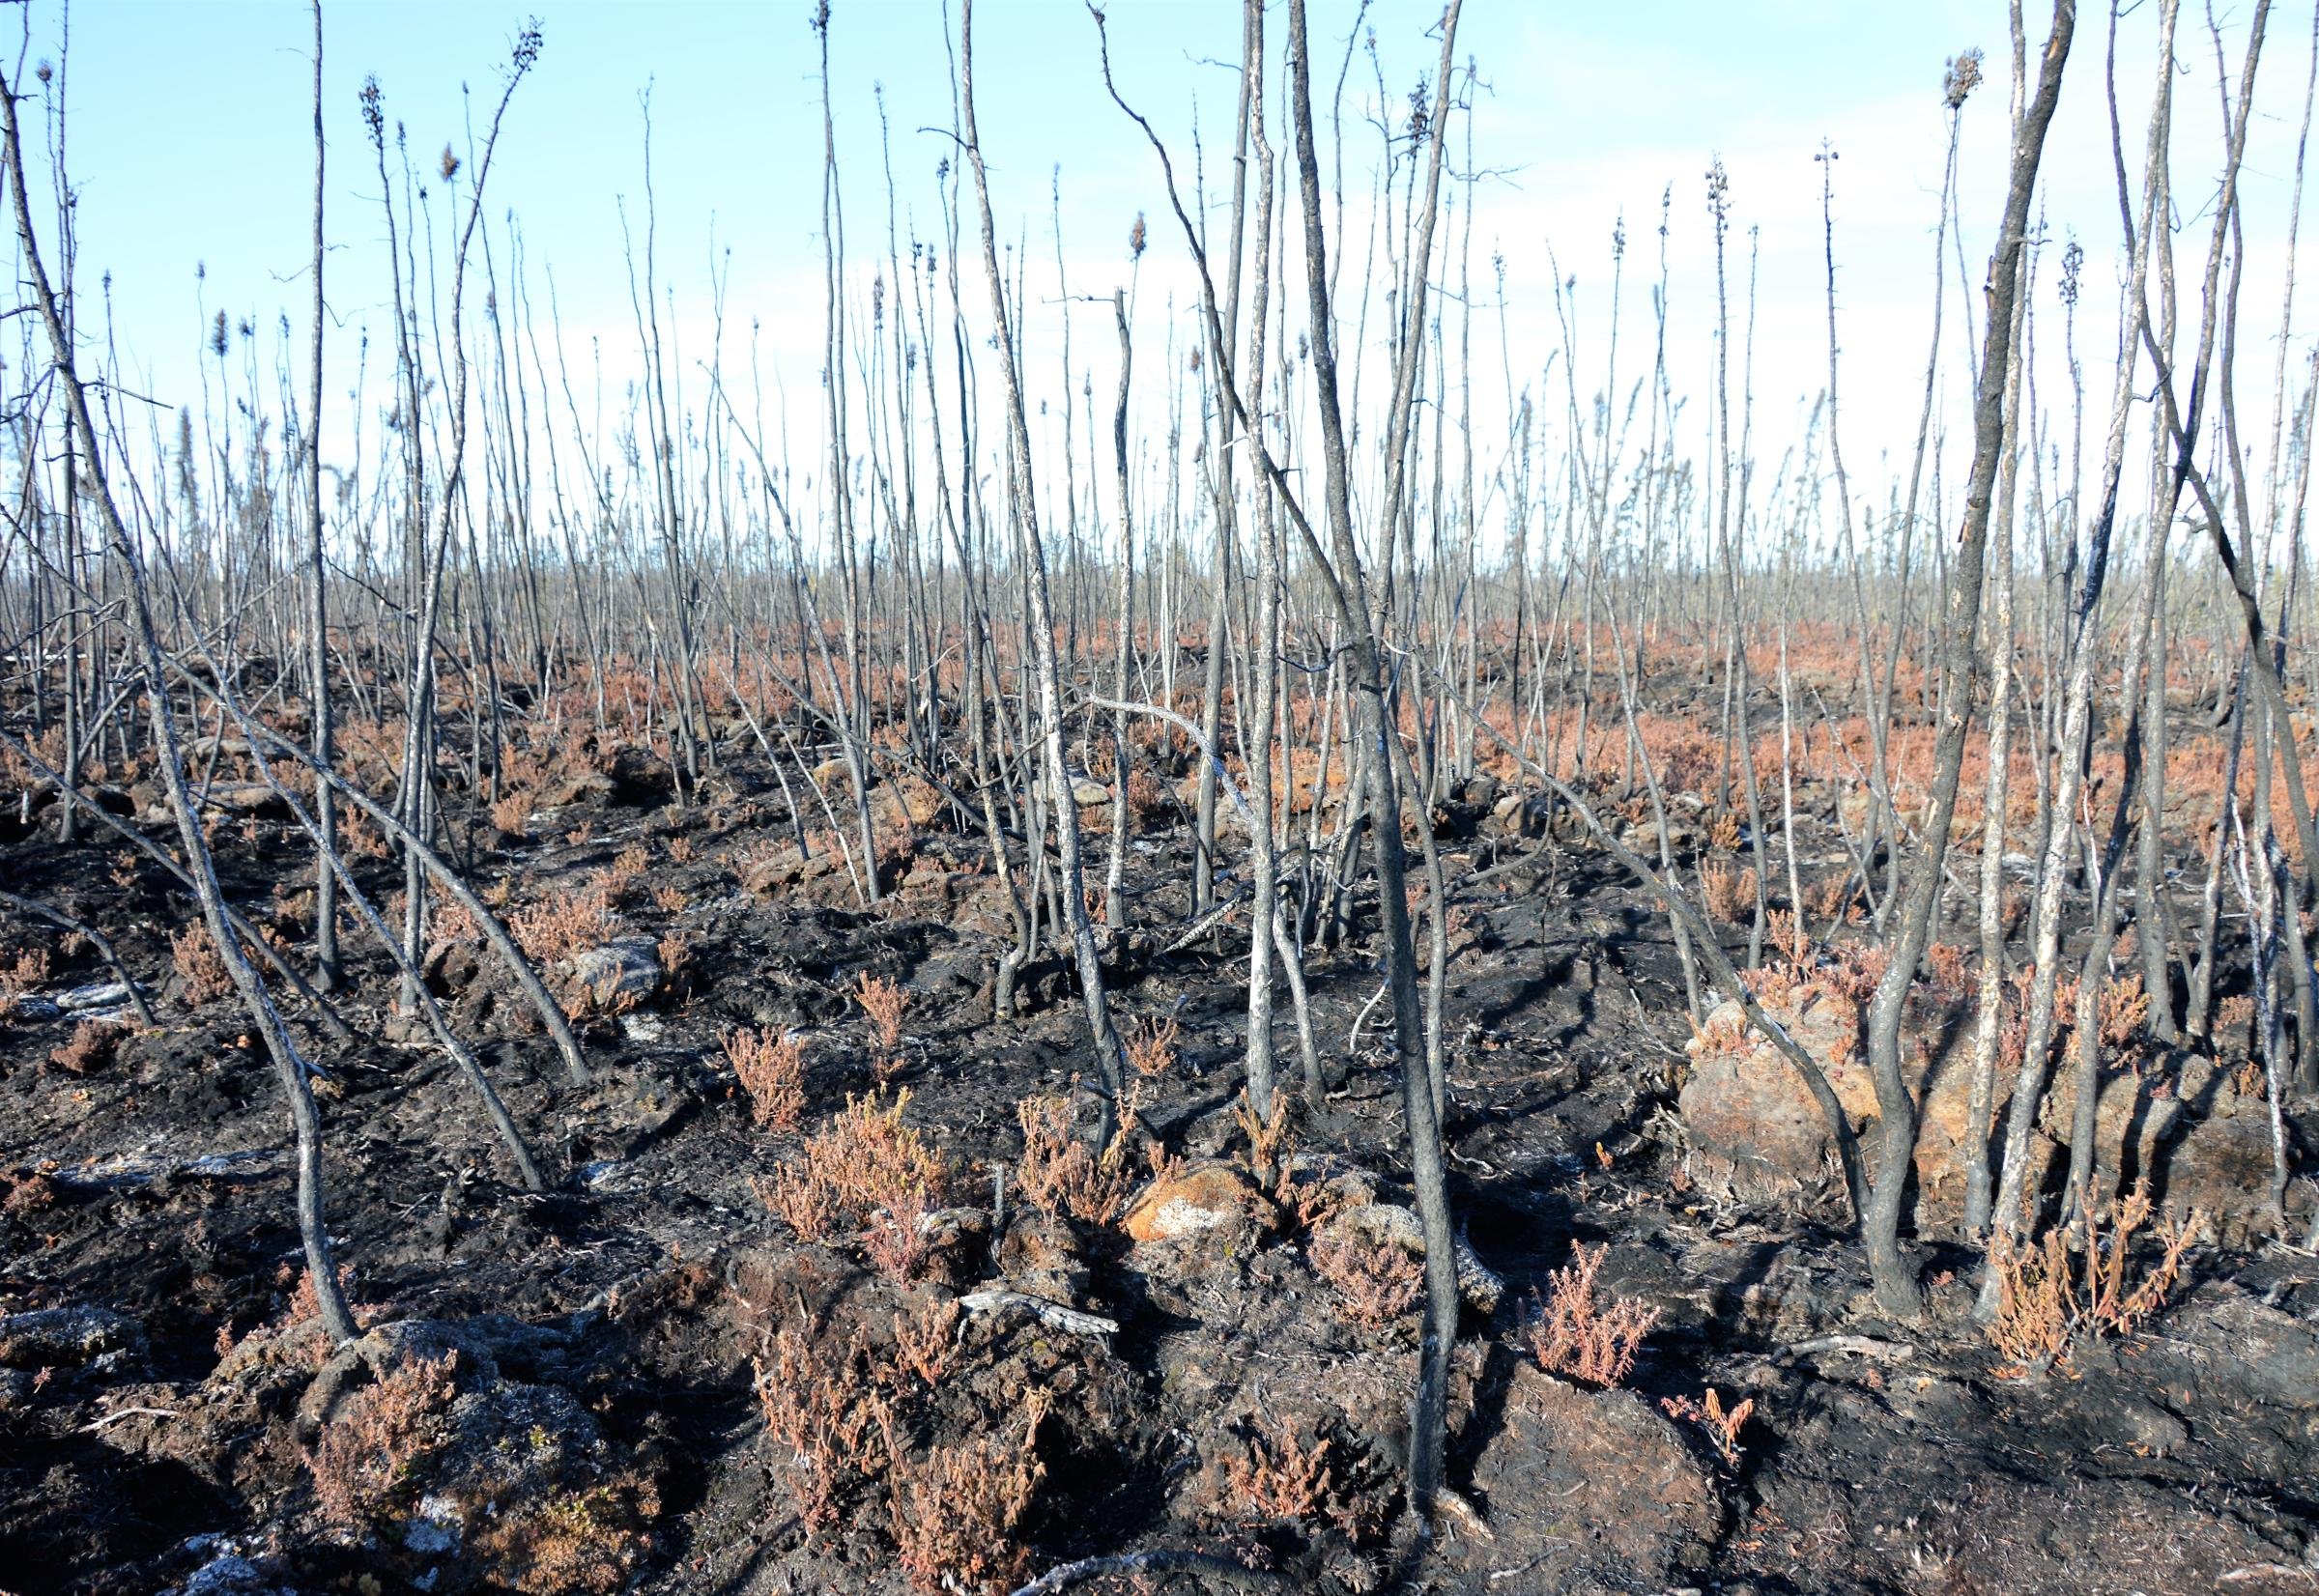 Pictured here is a permafrost peatland in northern Alberta that burned in 2019. The dead black spruce trees will eventually fall onto the charred bare surface of the peatland, while Sphagnum moss, shrubs, and new spruce trees will slowly start to regrow. The fire will also increase permafrost thaw.